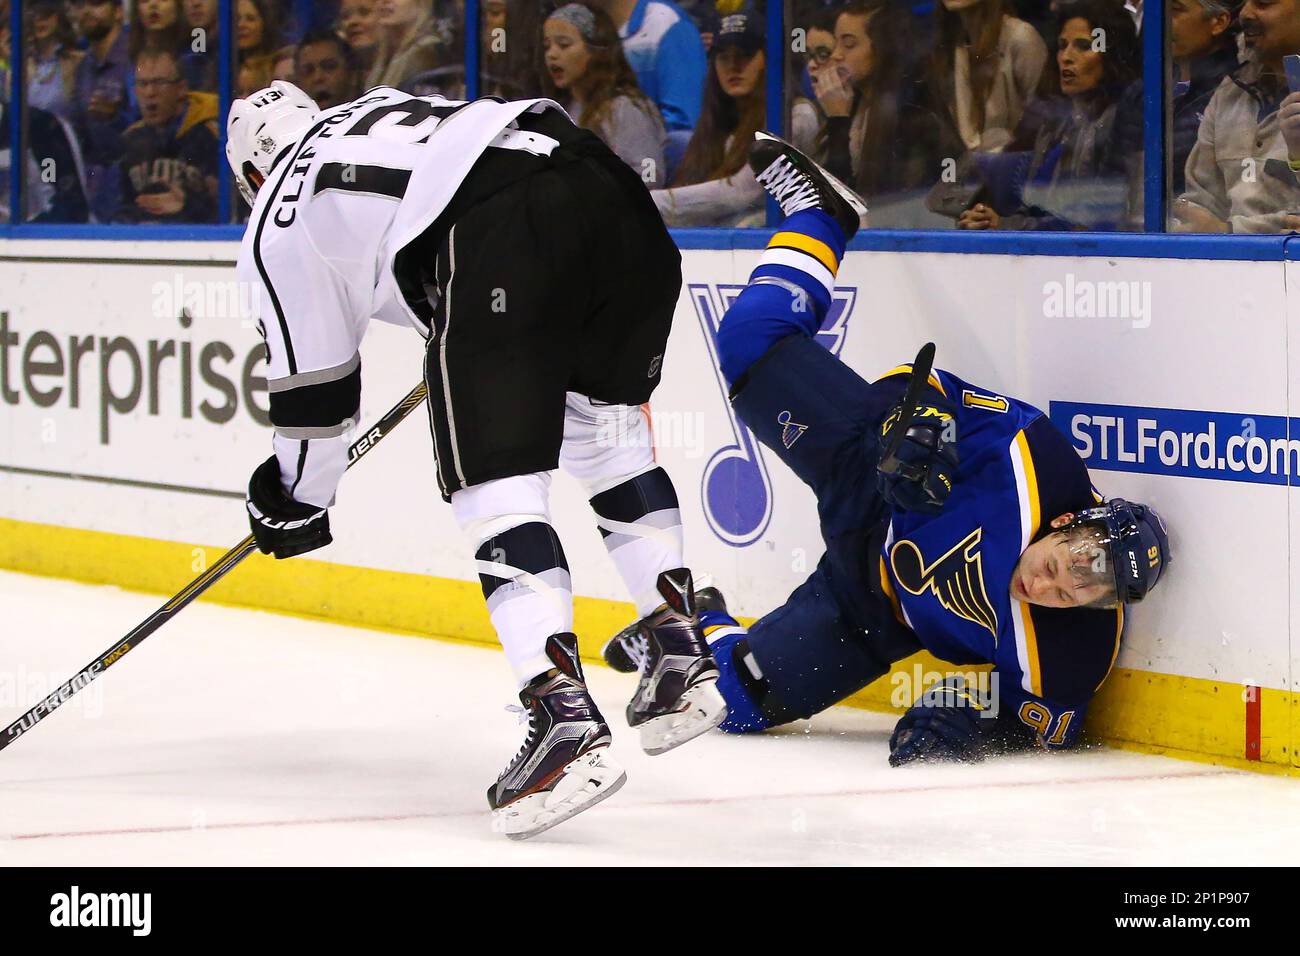 https://c8.alamy.com/comp/2P1P907/february-18-2016-st-louis-mo-st-louis-blues-right-wing-vladimir-tarasenko-91-is-upended-as-he-is-checked-into-th-boards-by-los-angeles-kings-left-wing-kyle-clifford-13-during-the-second-period-of-a-nhl-hockey-game-thursday-feb-18-2016-in-st-louis-mandatory-credit-billy-hurstcsm-cal-sport-media-via-ap-images-2P1P907.jpg